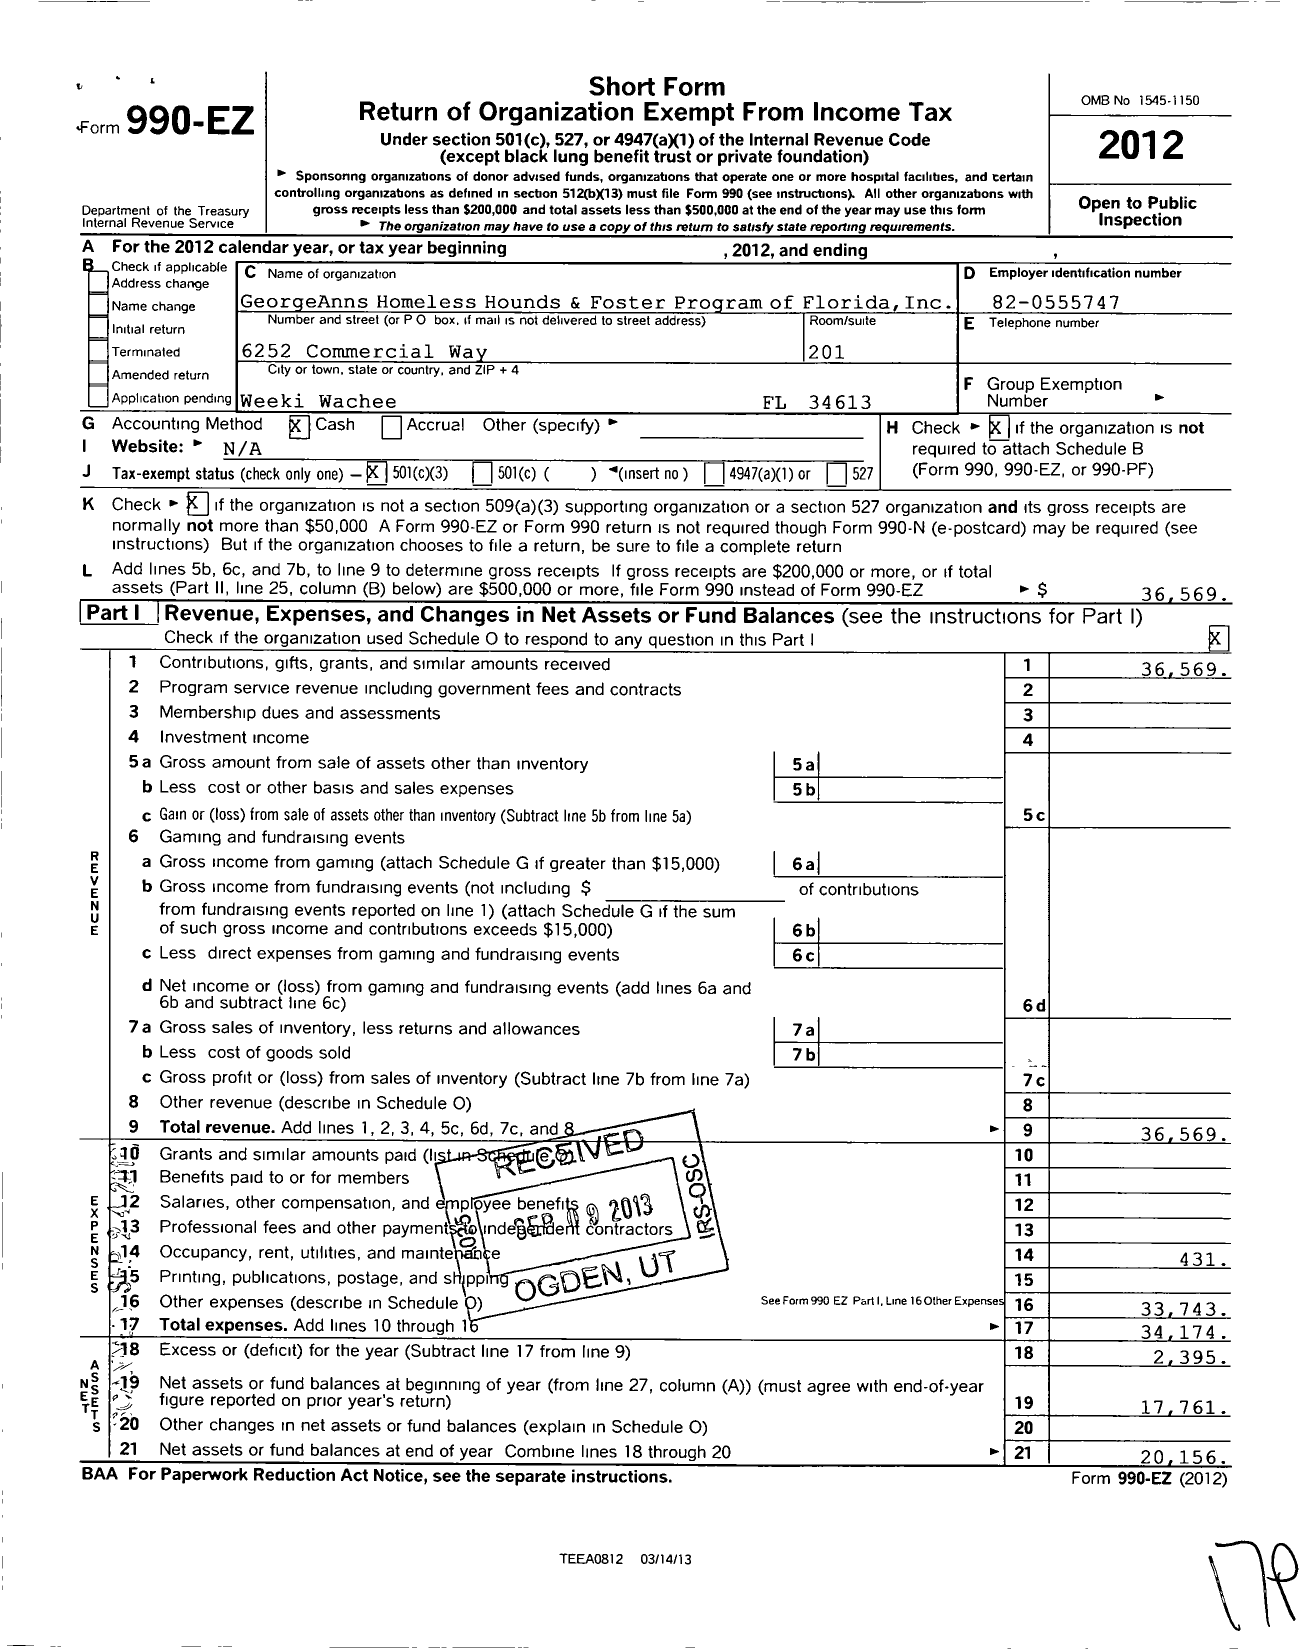 Image of first page of 2012 Form 990EZ for Georgeanns Homeless Hounds and Foster Program of Florida